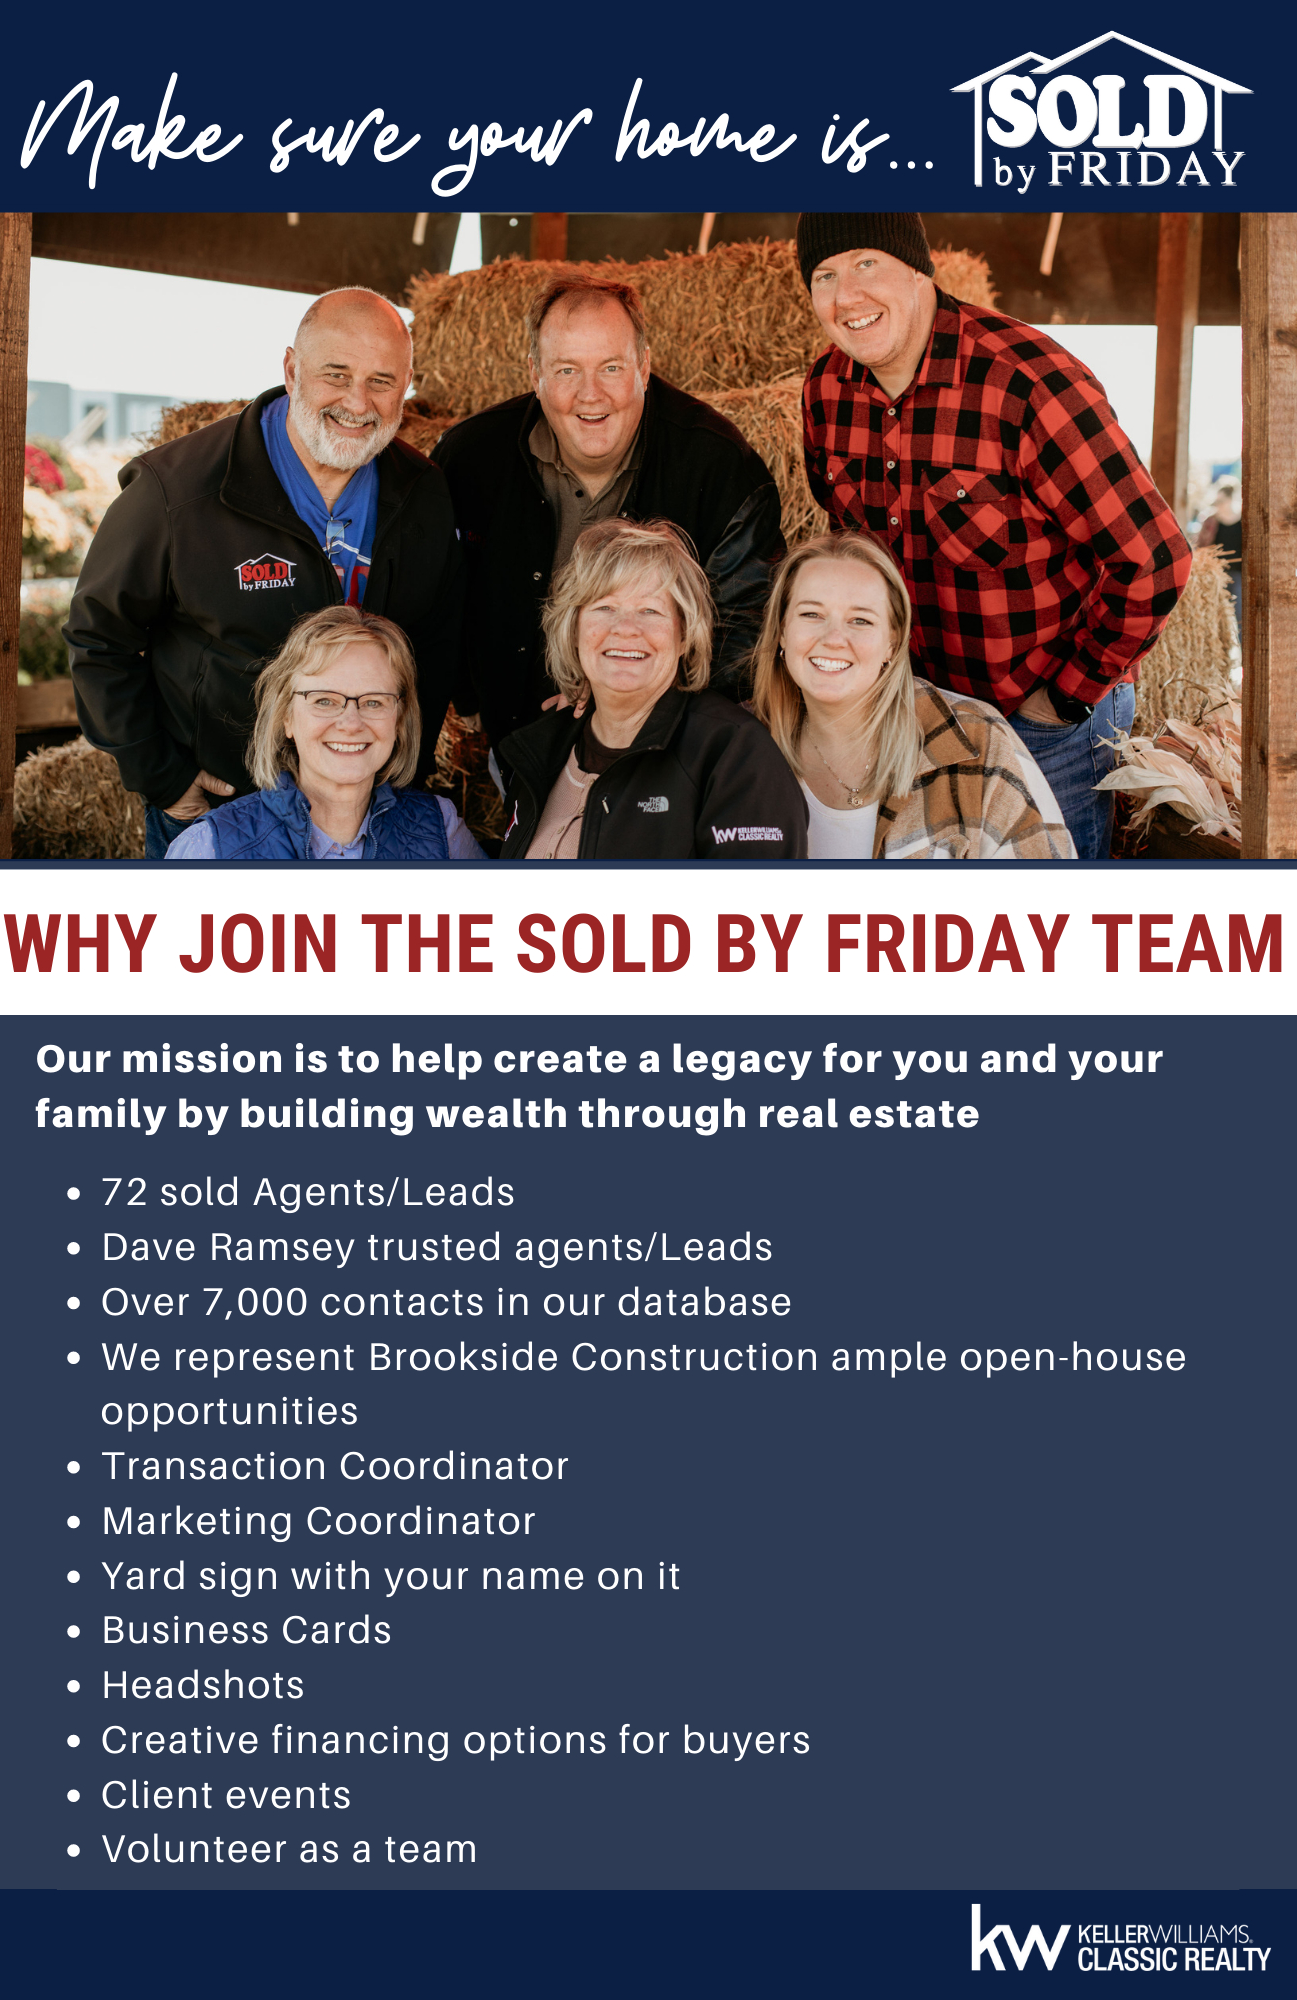 Why join the SOLD by Friday team?